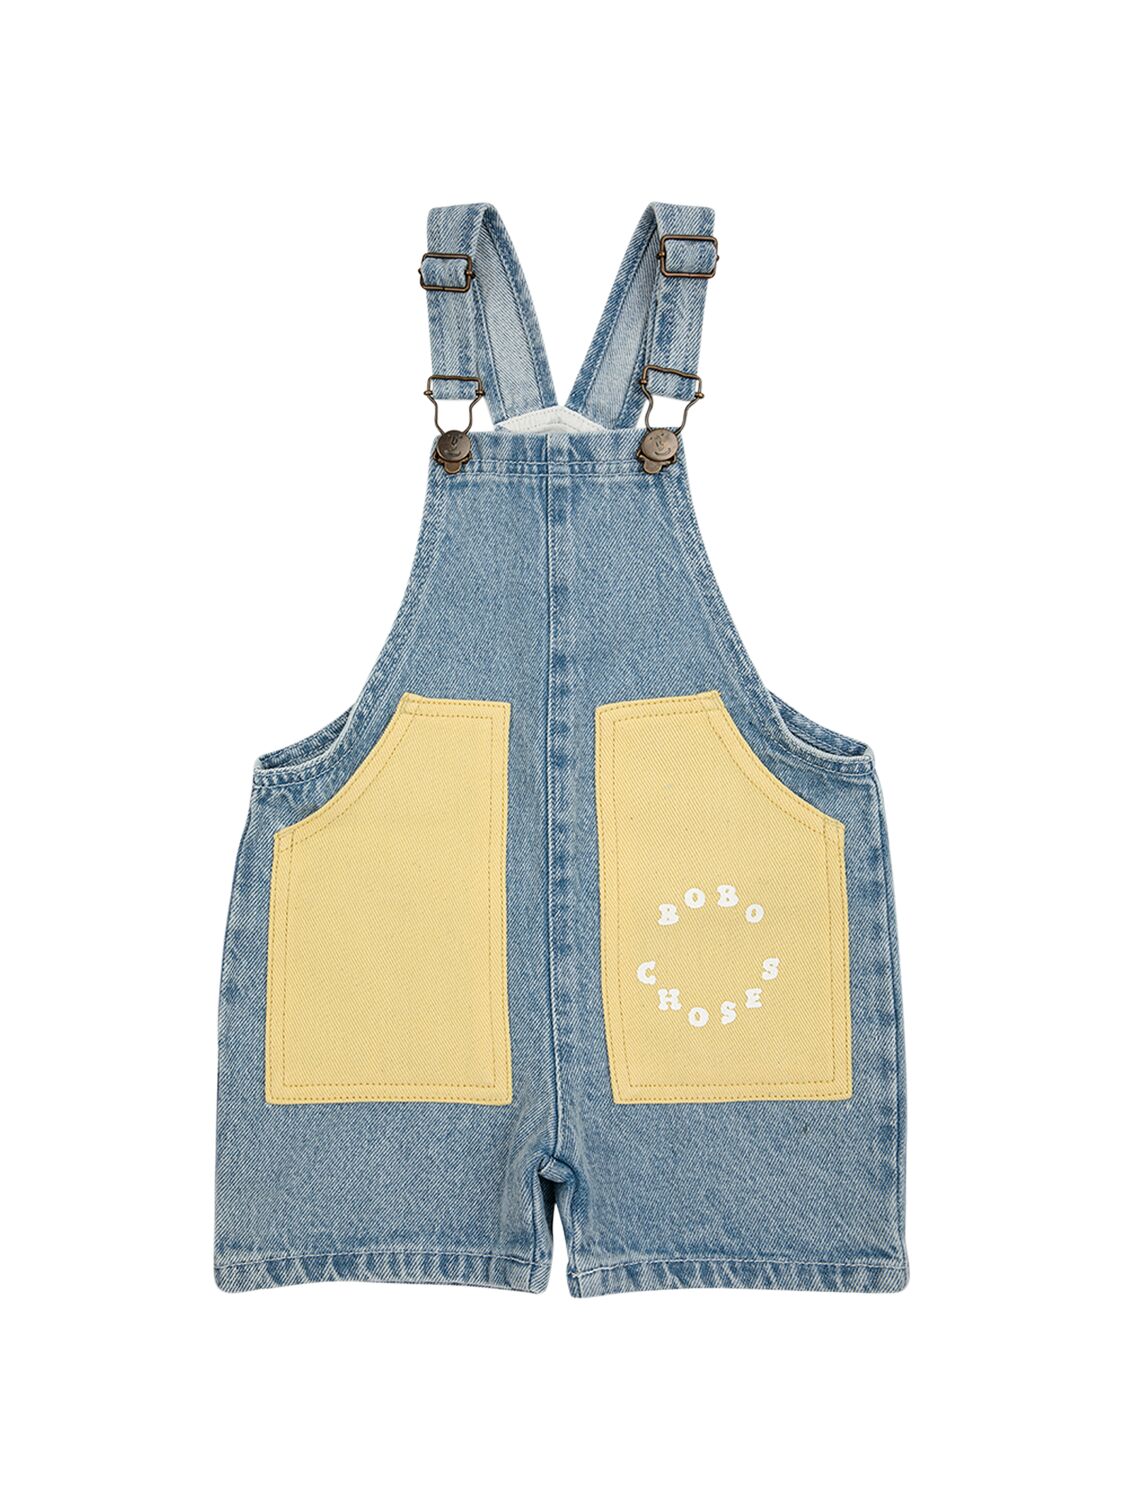 Bobo Choses Babies' Denim Overalls In Blue,yellow